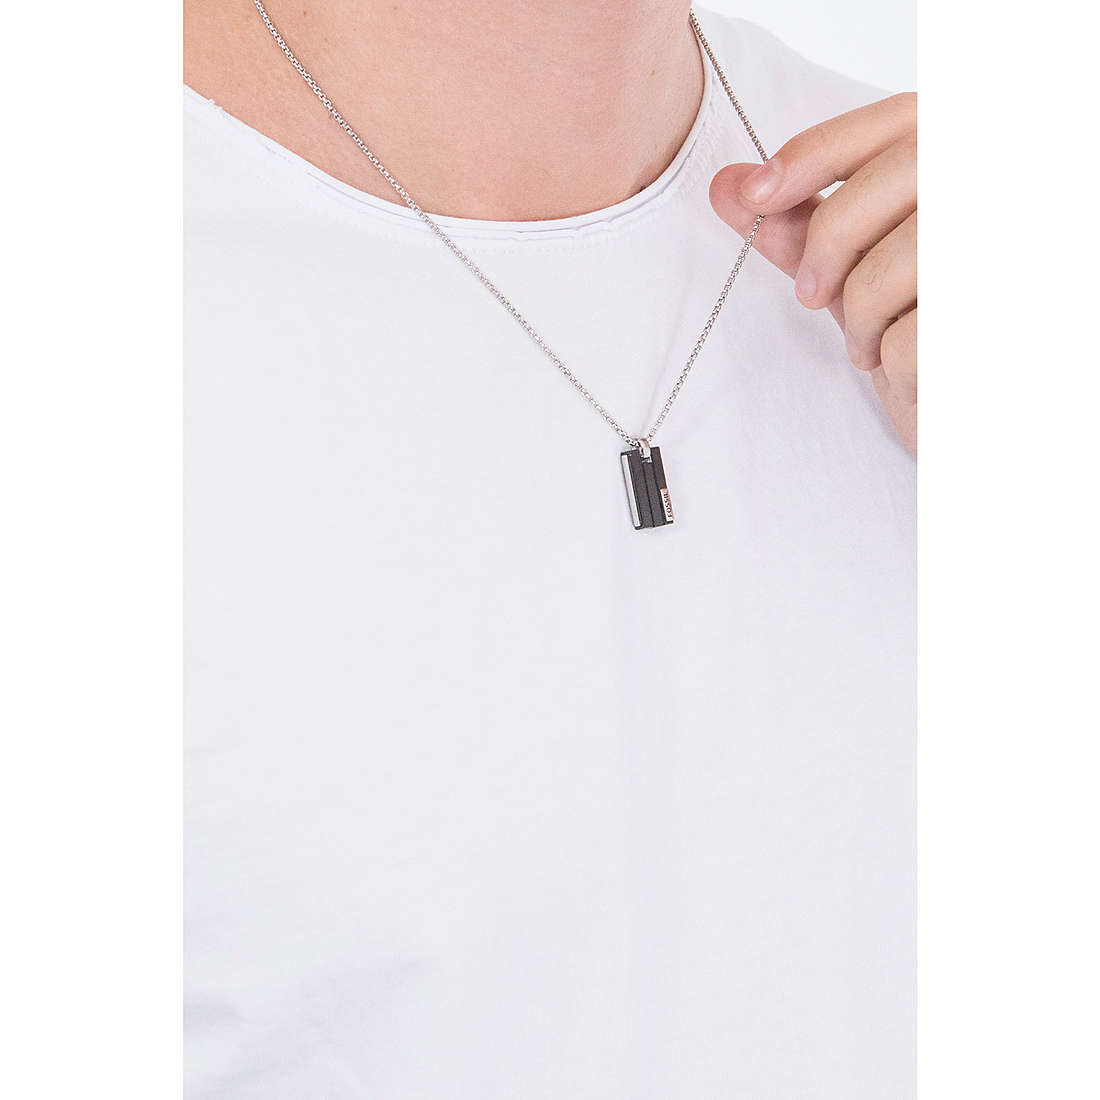 Fossil necklaces Dress man JF03126998 wearing